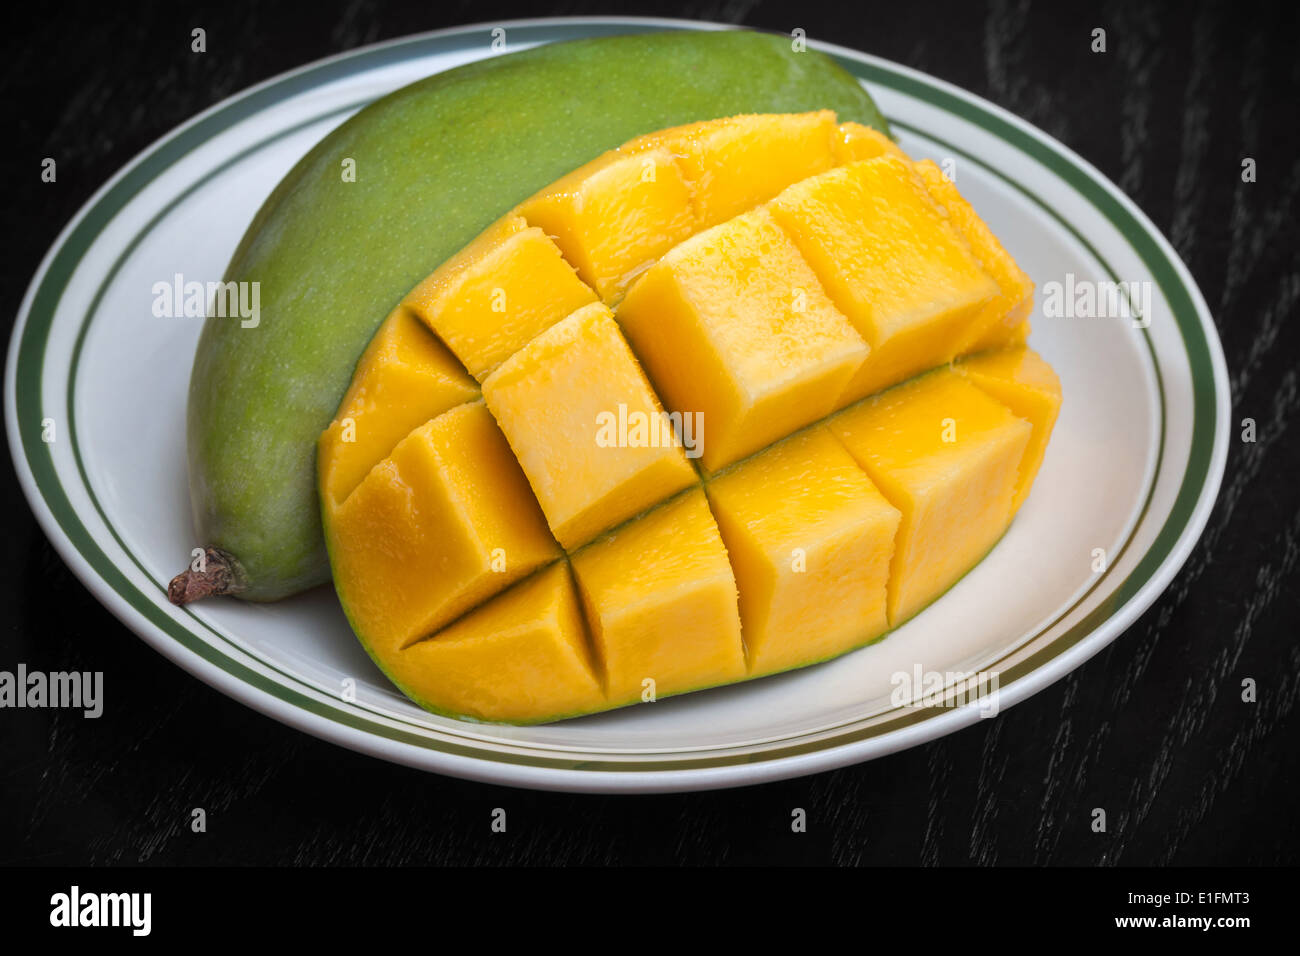 Yellow sliced on cubes mango on white plate Stock Photo